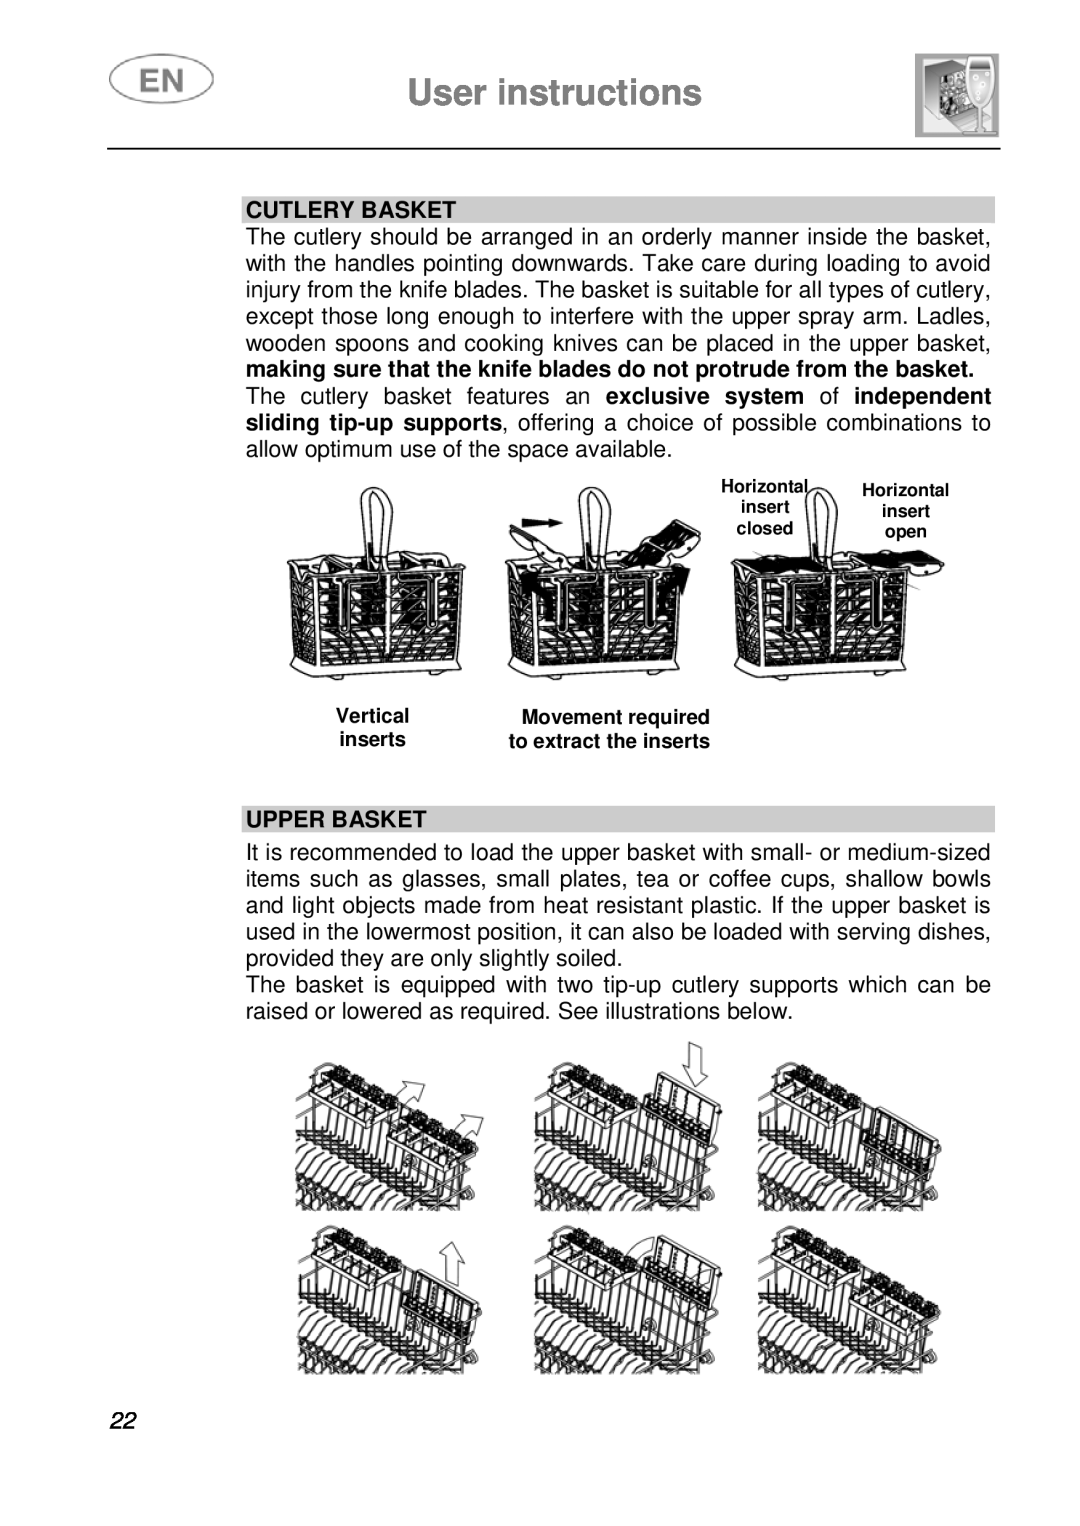 CDA WC460 manual User instructions, Cutlery Basket, Upper Basket, Vertical, Movement required, to extract the inserts 